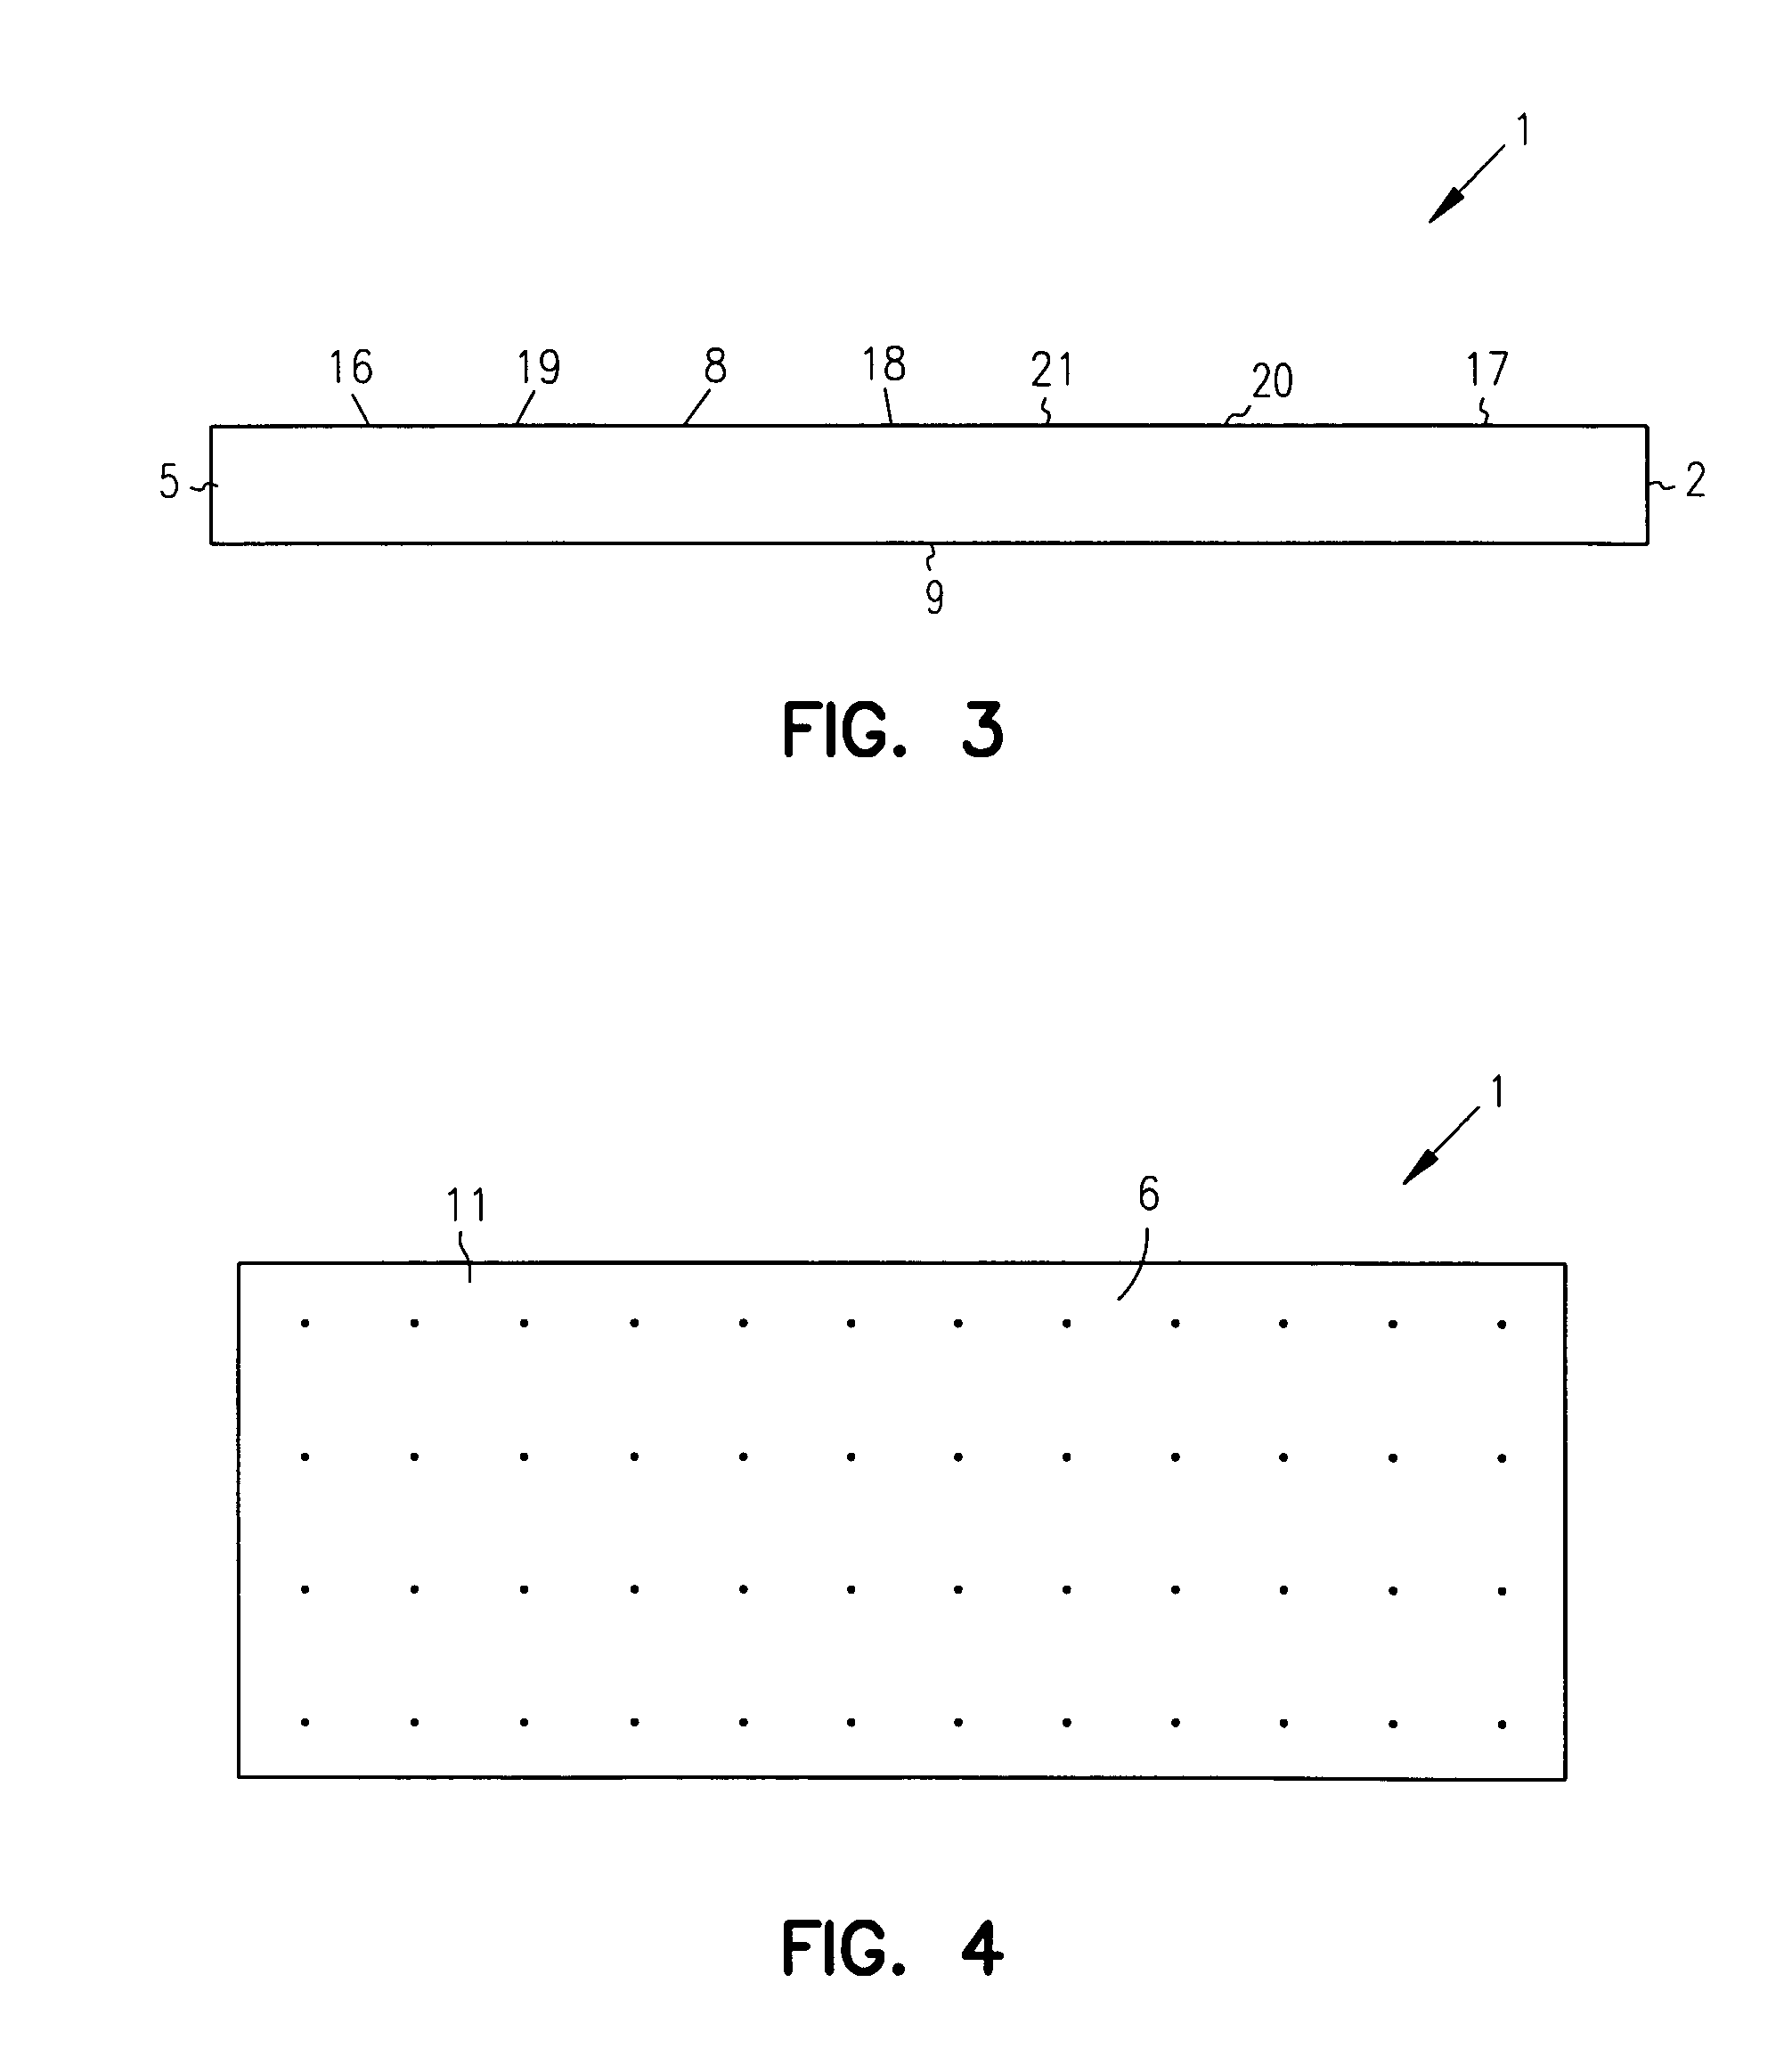 Wood-based product treated with silicone-containing material and dianion, and methods of making the same